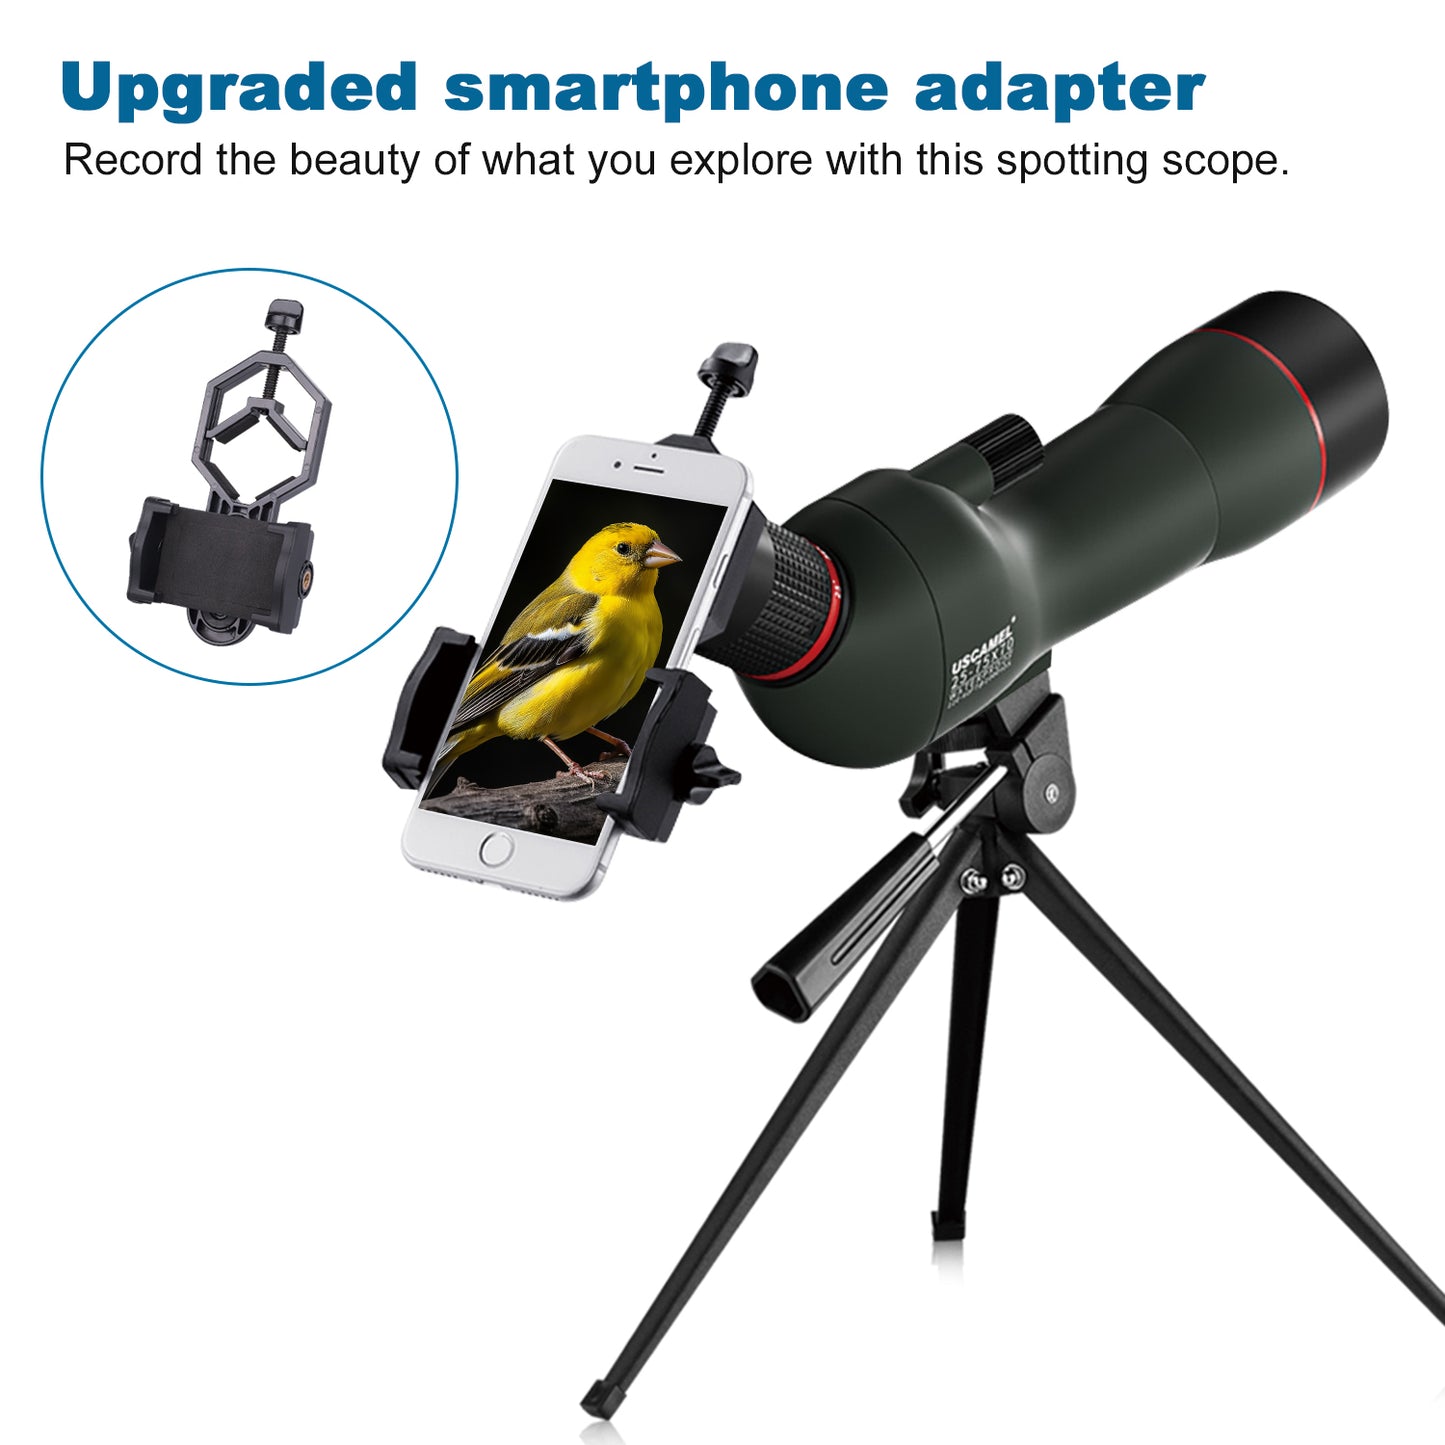 25-75x70 HD Spotting Scopes for Target Shooting, Spotter Scope for Wildlife Viewing Hunting Bird Watching - BAK4 Waterproof Spotting Scope with Tripod, Upgraded Smartphone Holder, Carrying Bag